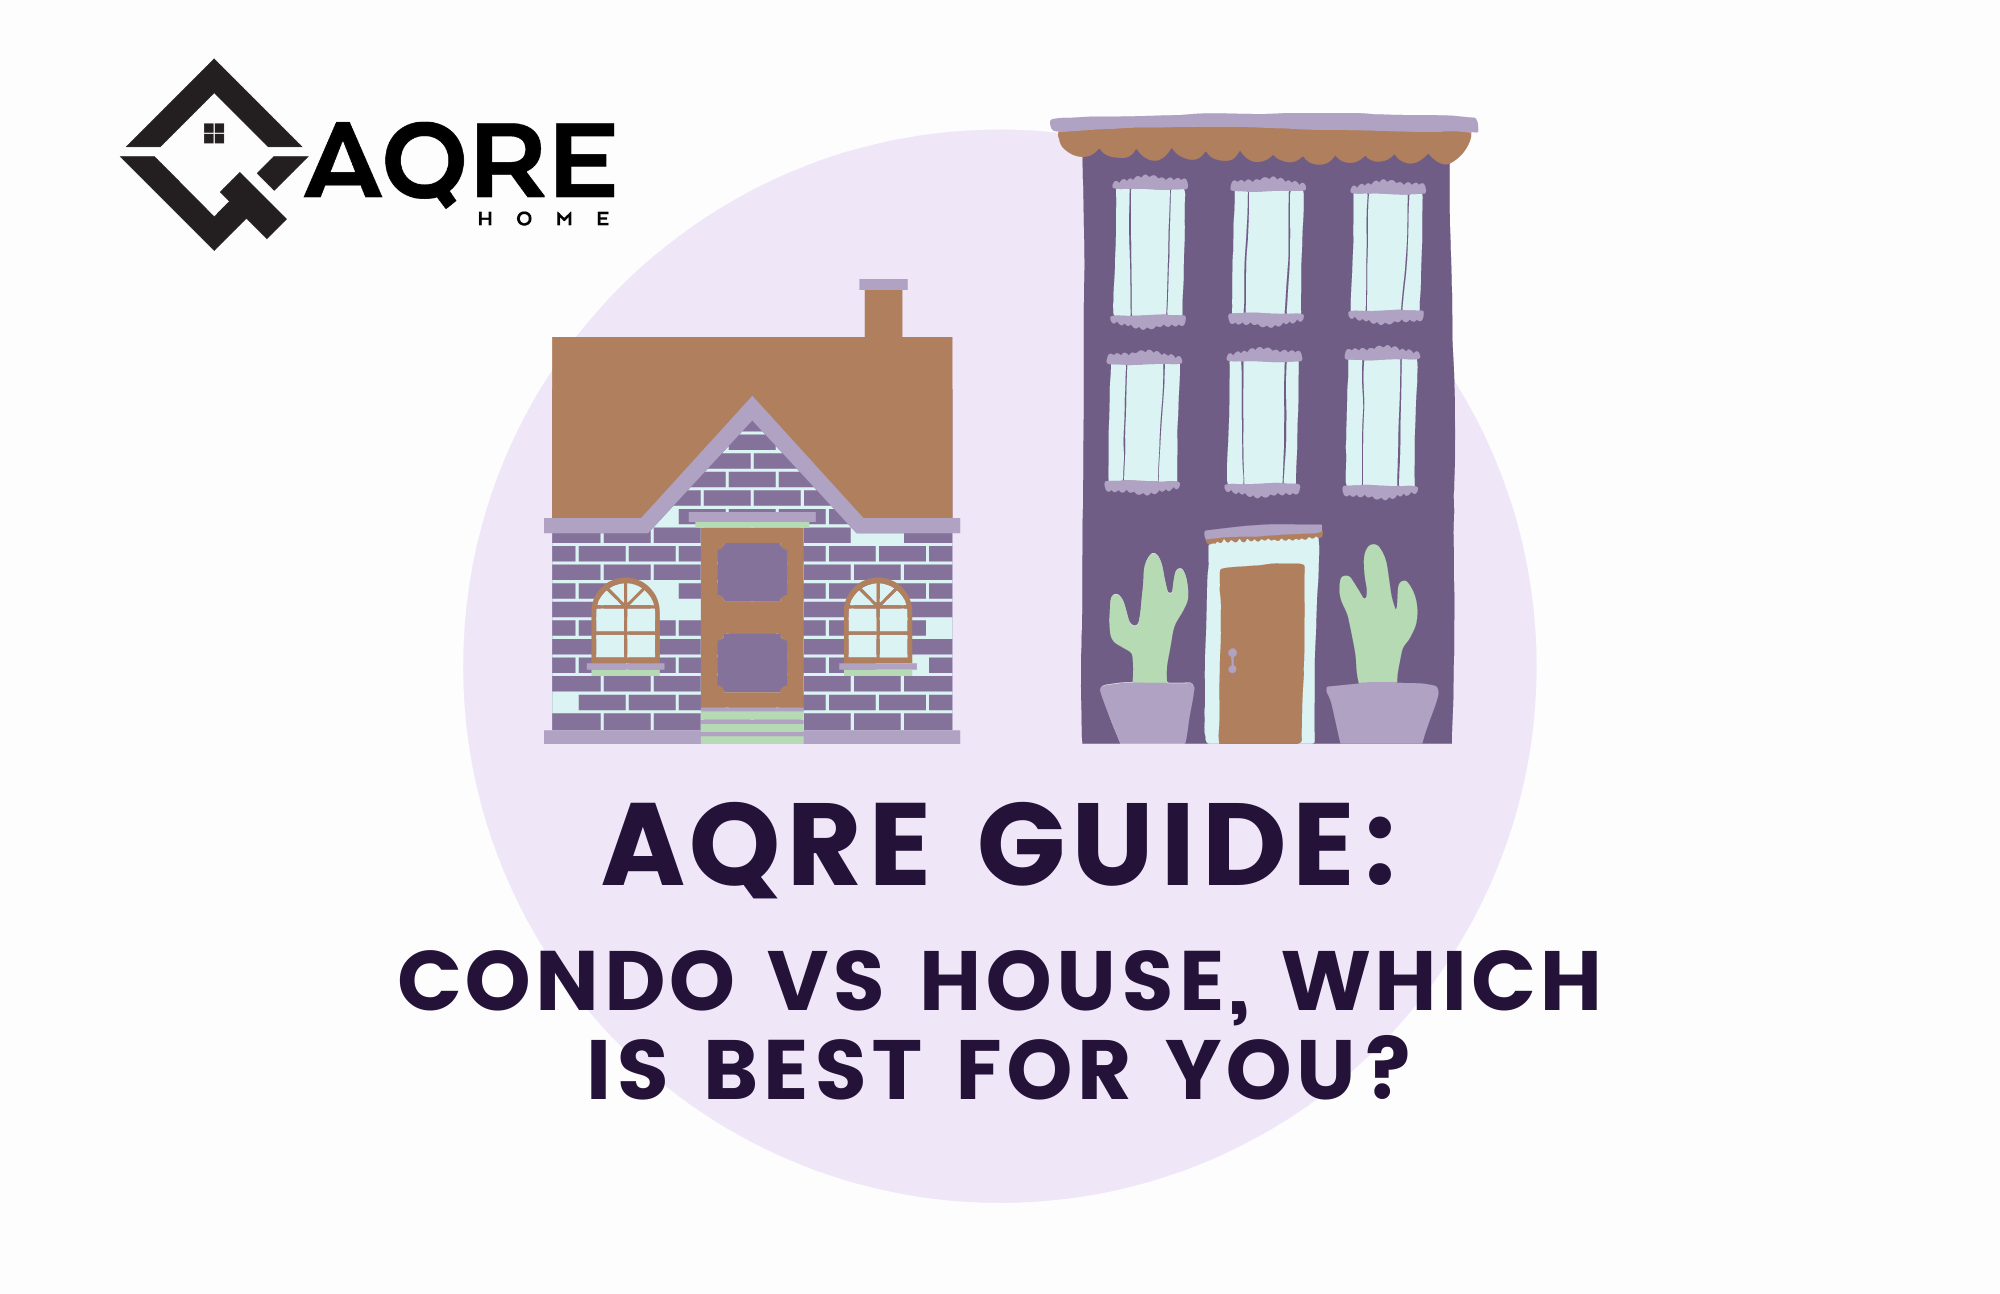 House vs. Condo: Which Is Better For YOU?